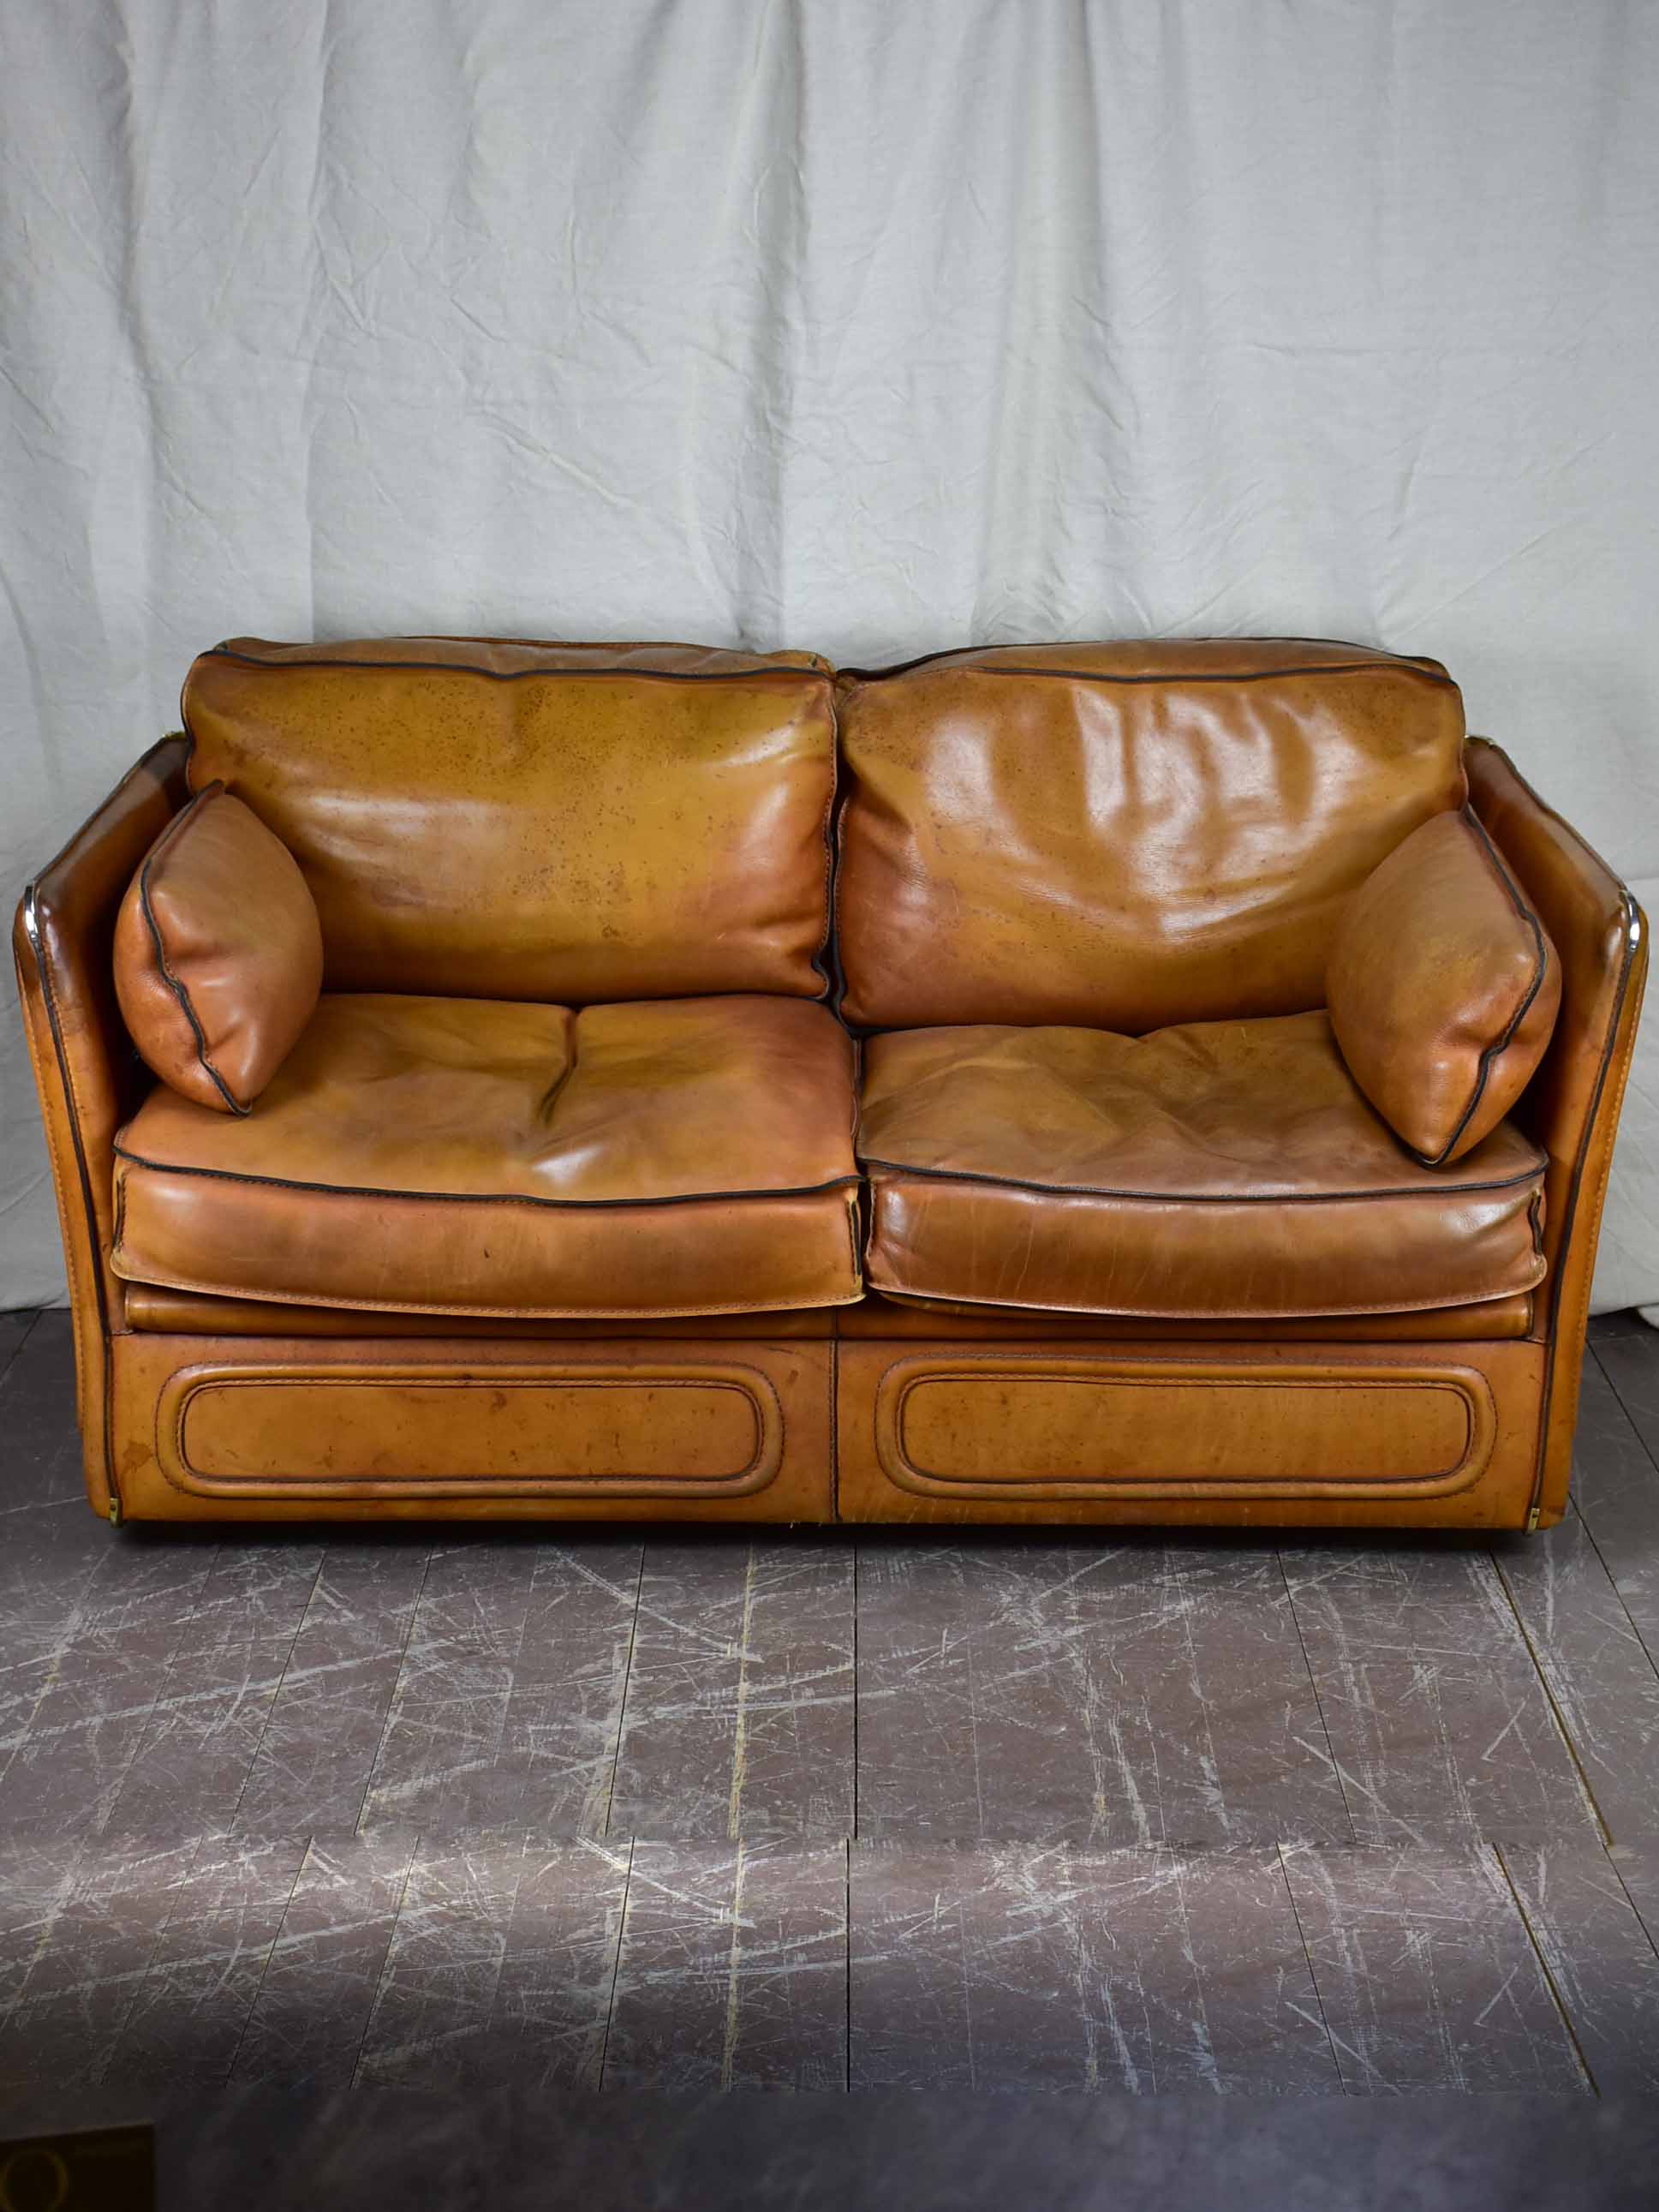 Vintage Roche Bobois Leather Two Seat